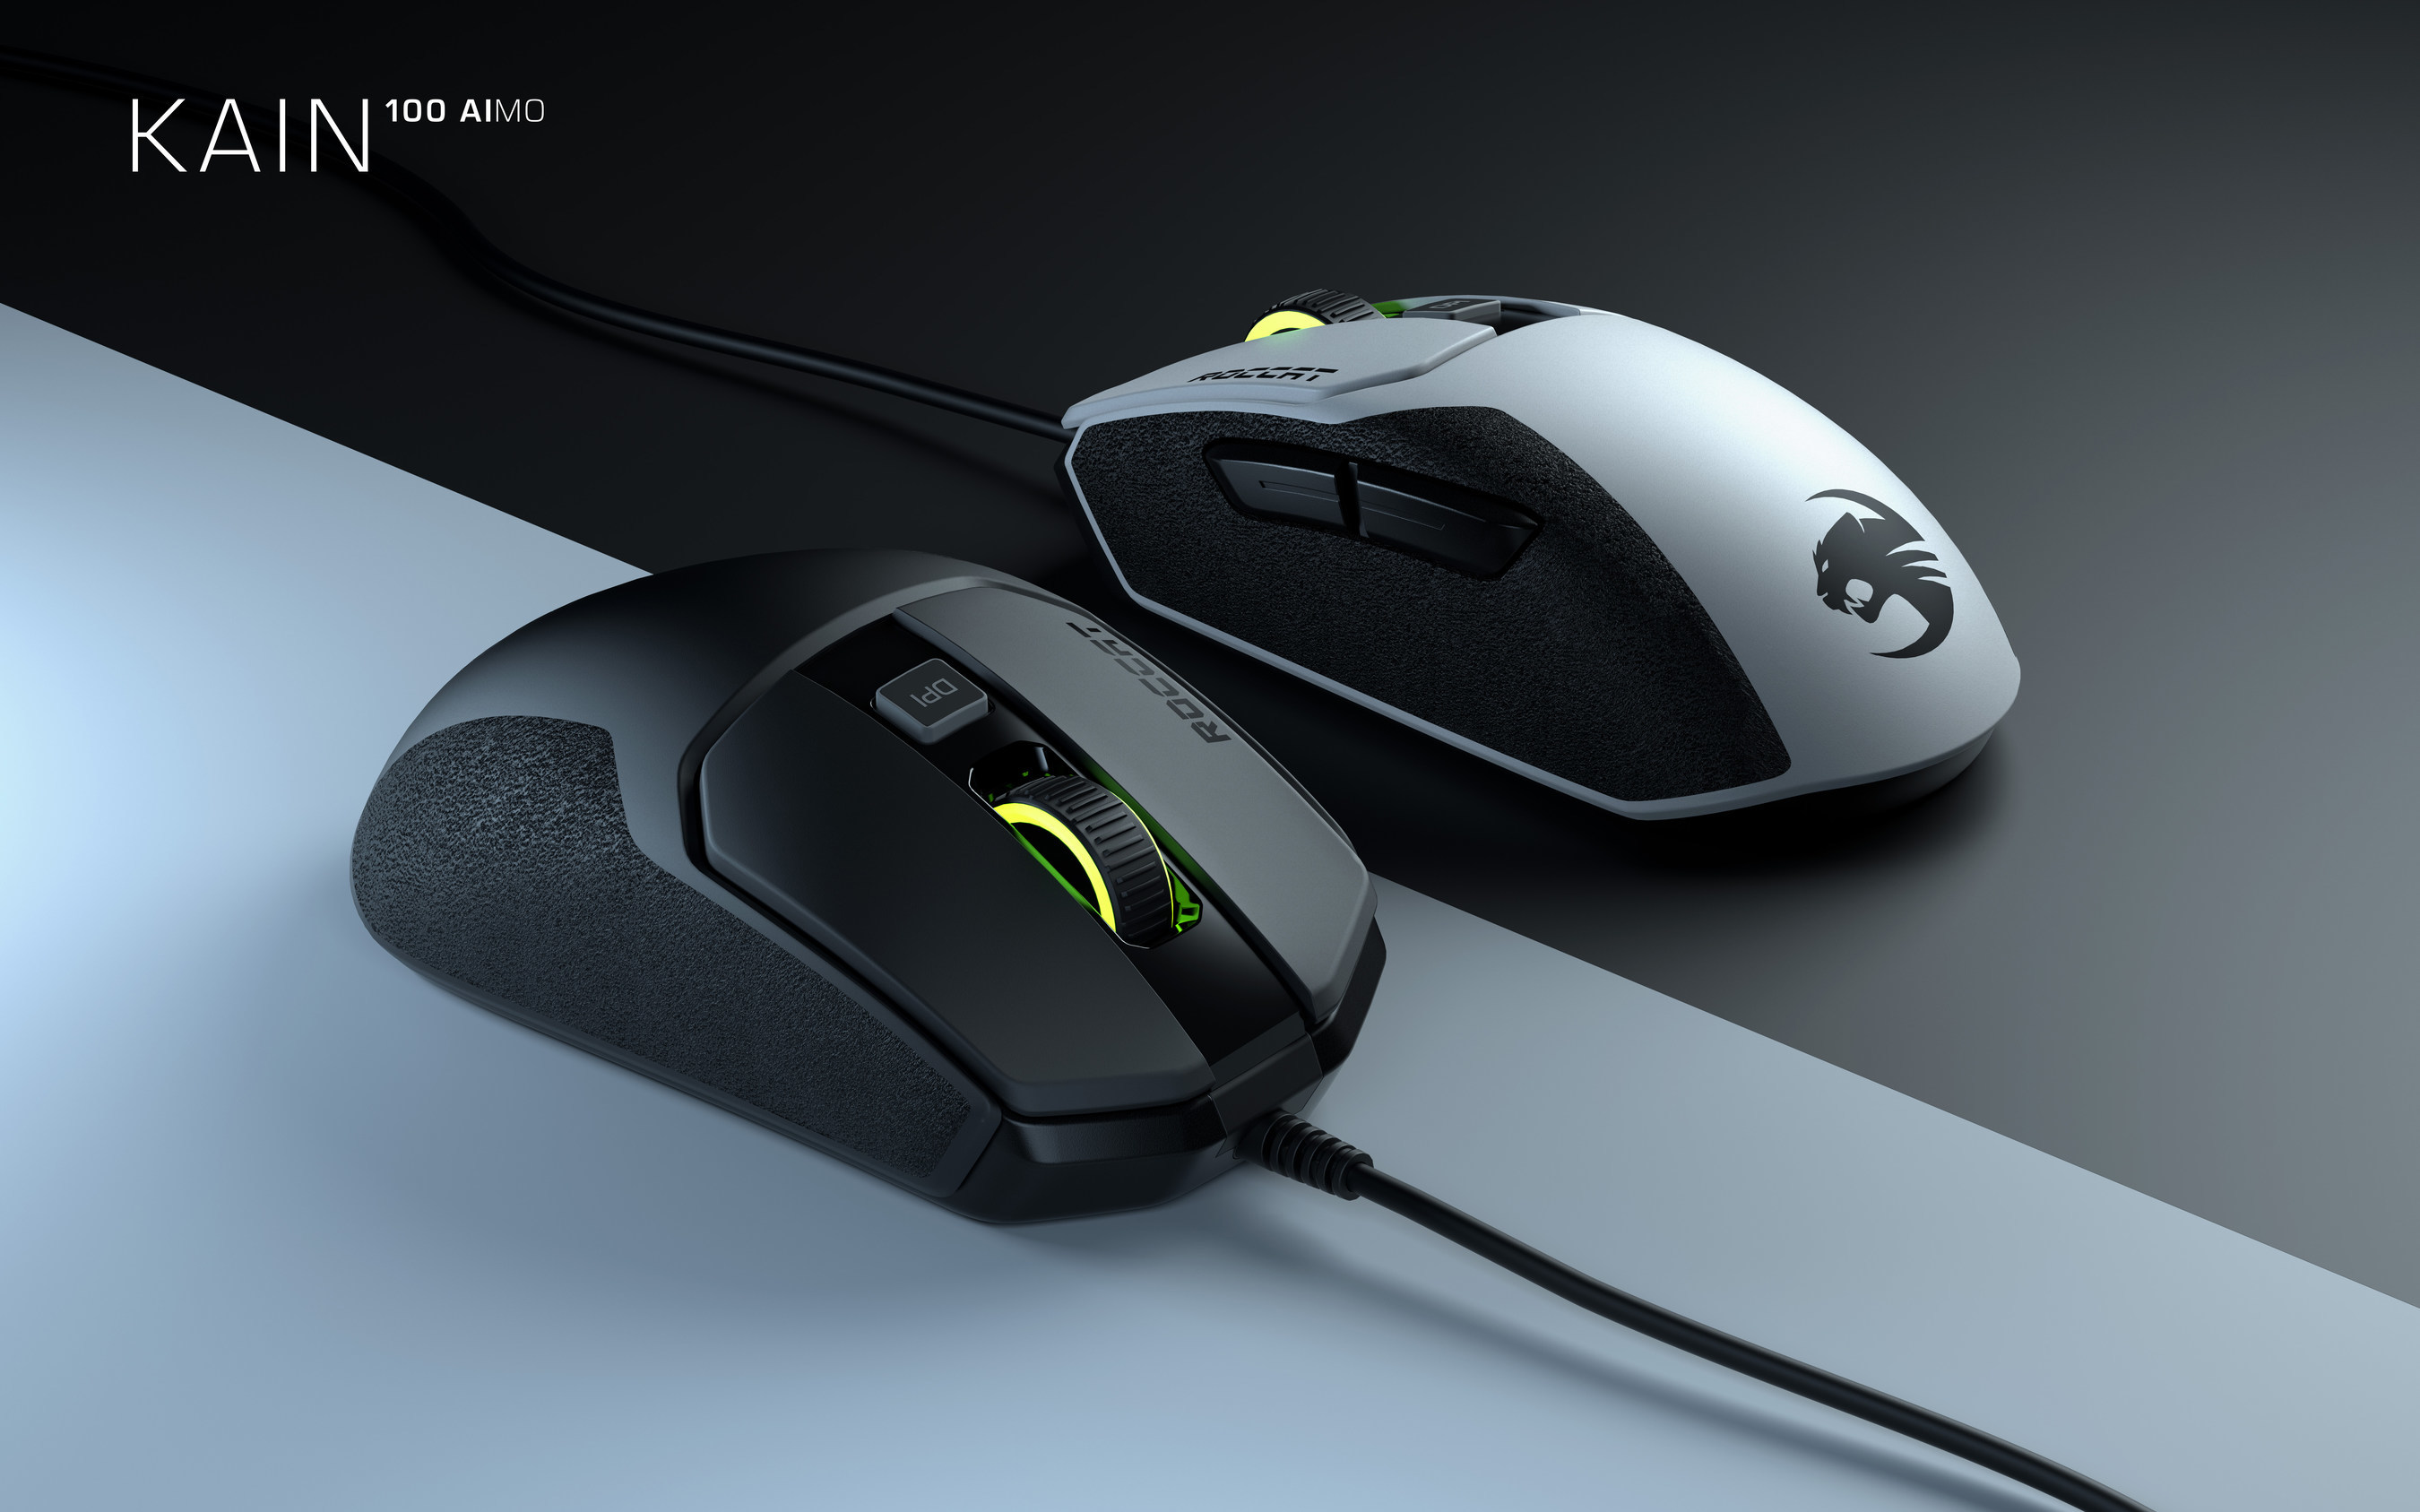 Roccat S All New Kain Gaming Mouse Series New Vulcan Keyboard Switch And Color Options And The Sense Aimo Pad Make Their European Debut At Gamescom 19